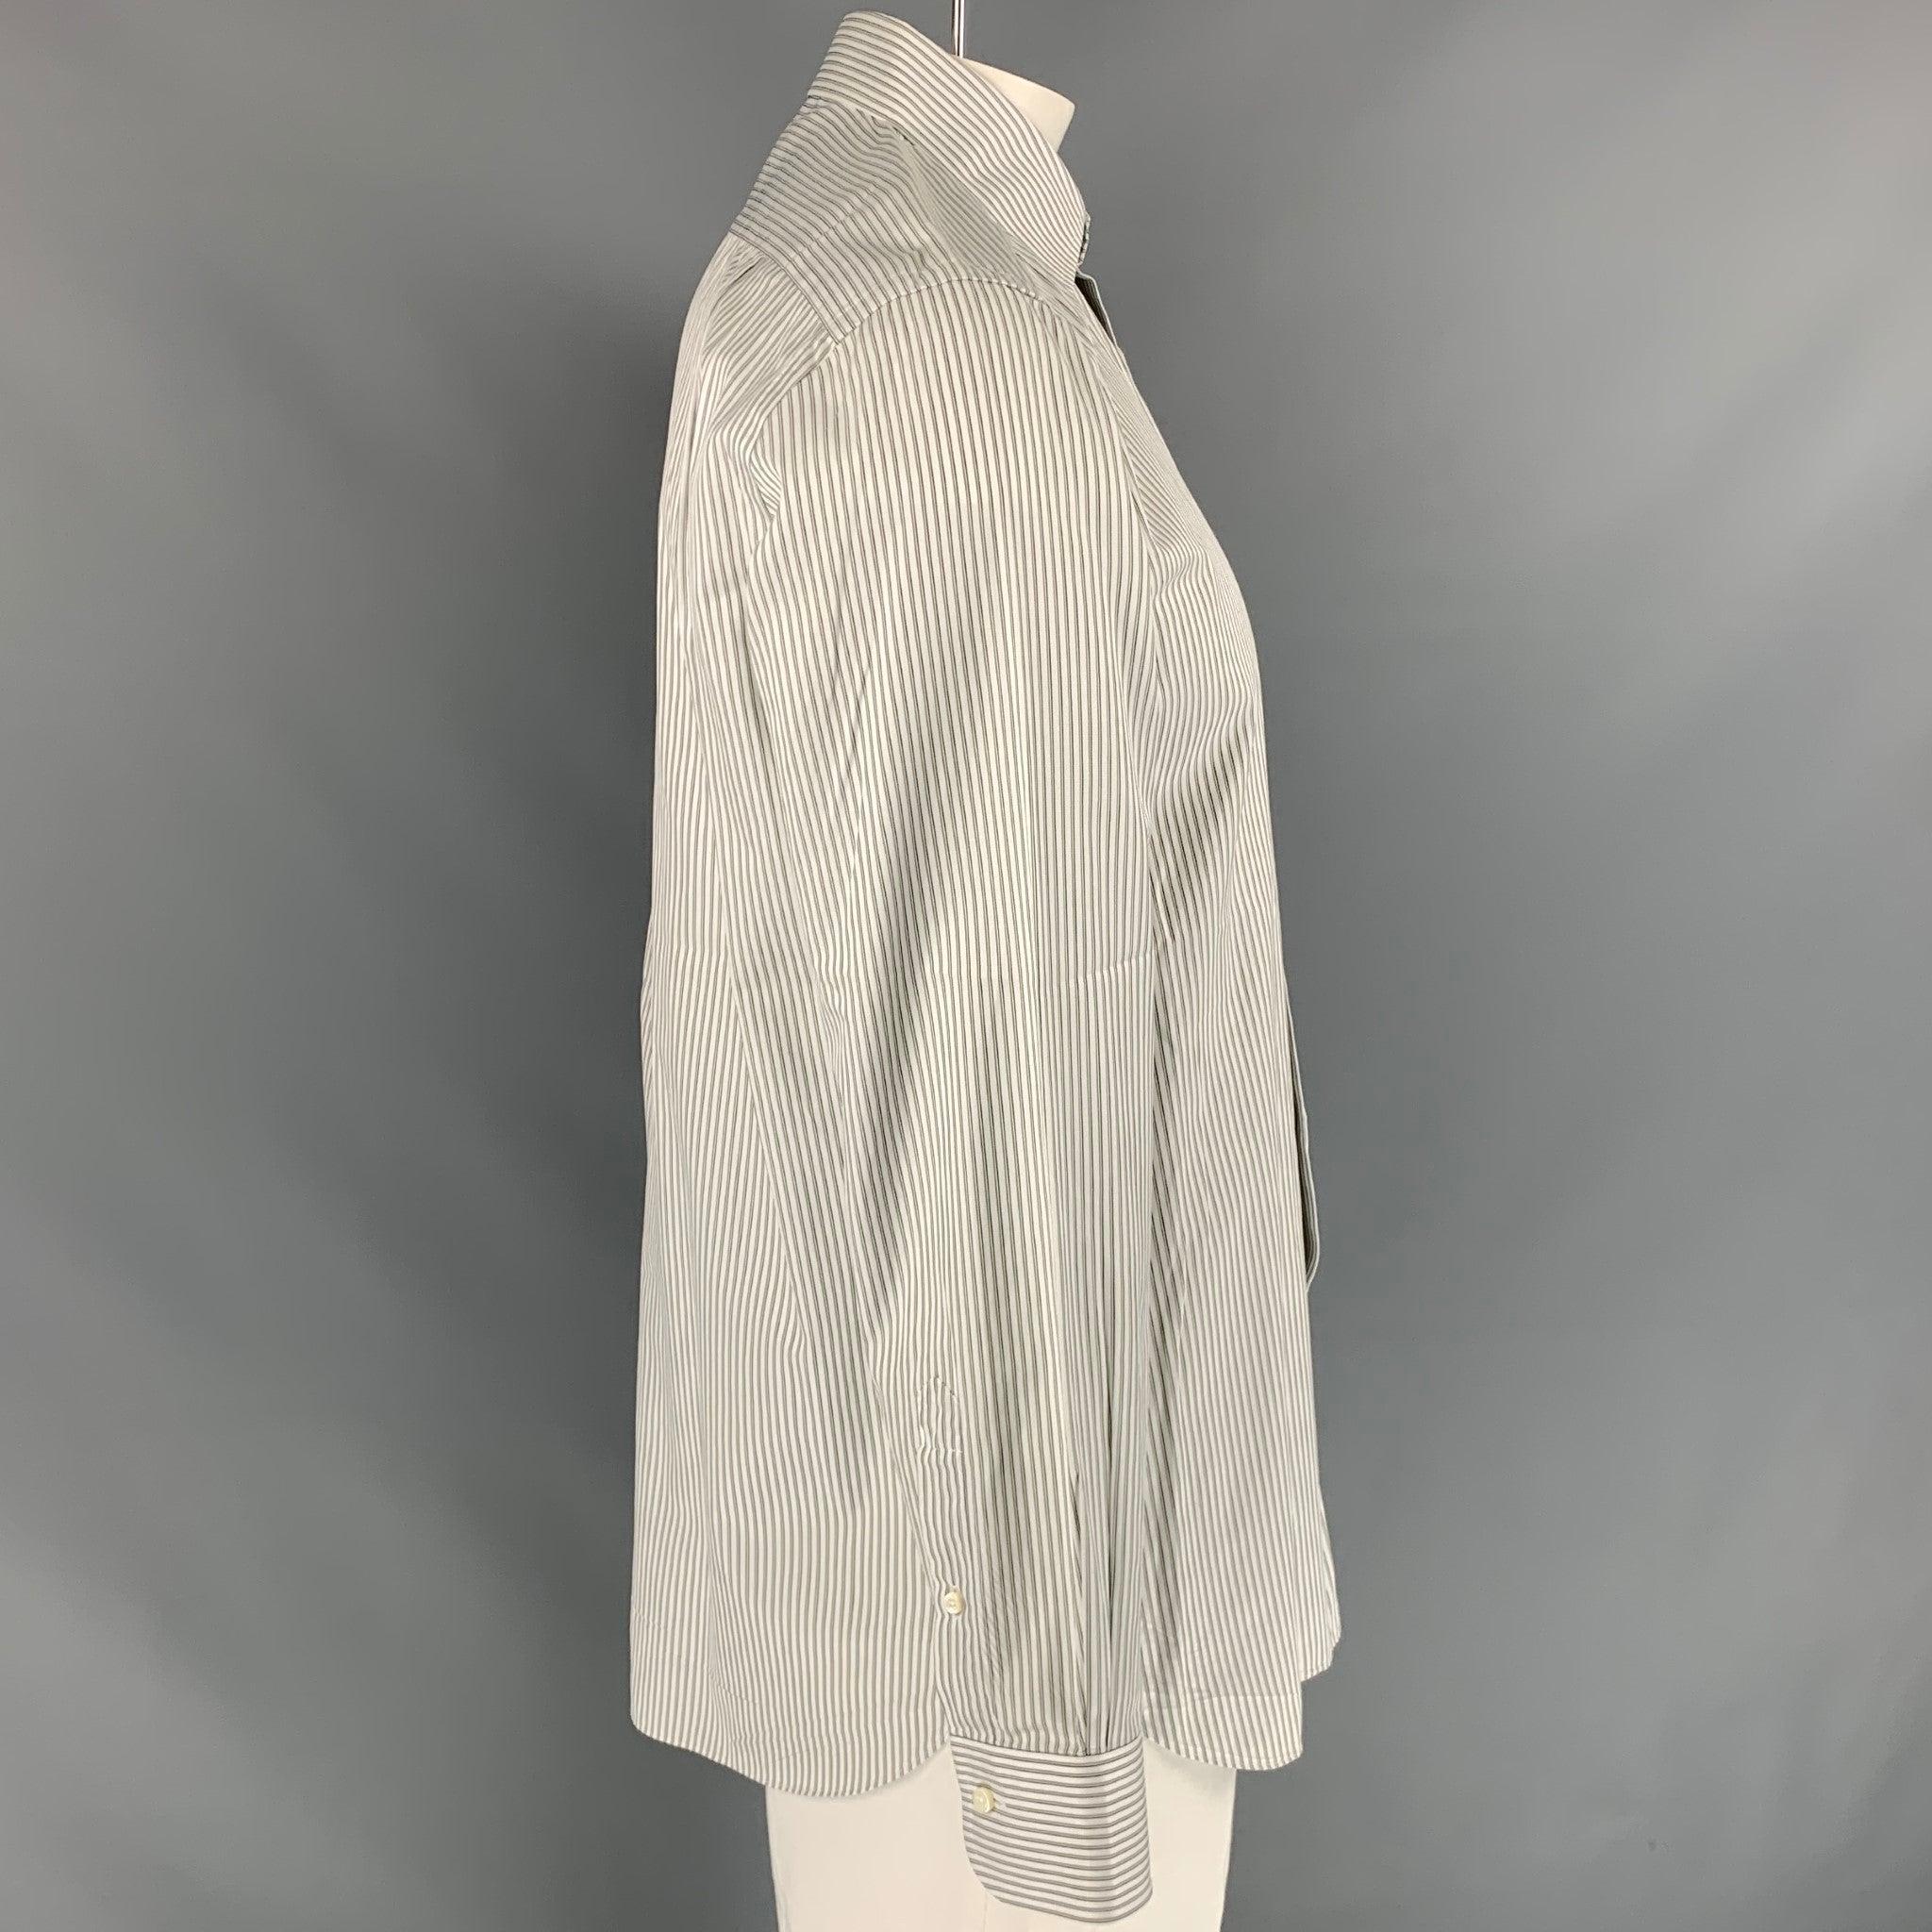 ERMENEGILDO ZEGNA 'Regular Fit' long sleeve shirt comes in white stripped cotton featuring a patch pocket at left front panel, spread collar, one button round cuff, and button up closure. Very Good Pre-Owned Condition. 

Marked:   41/16